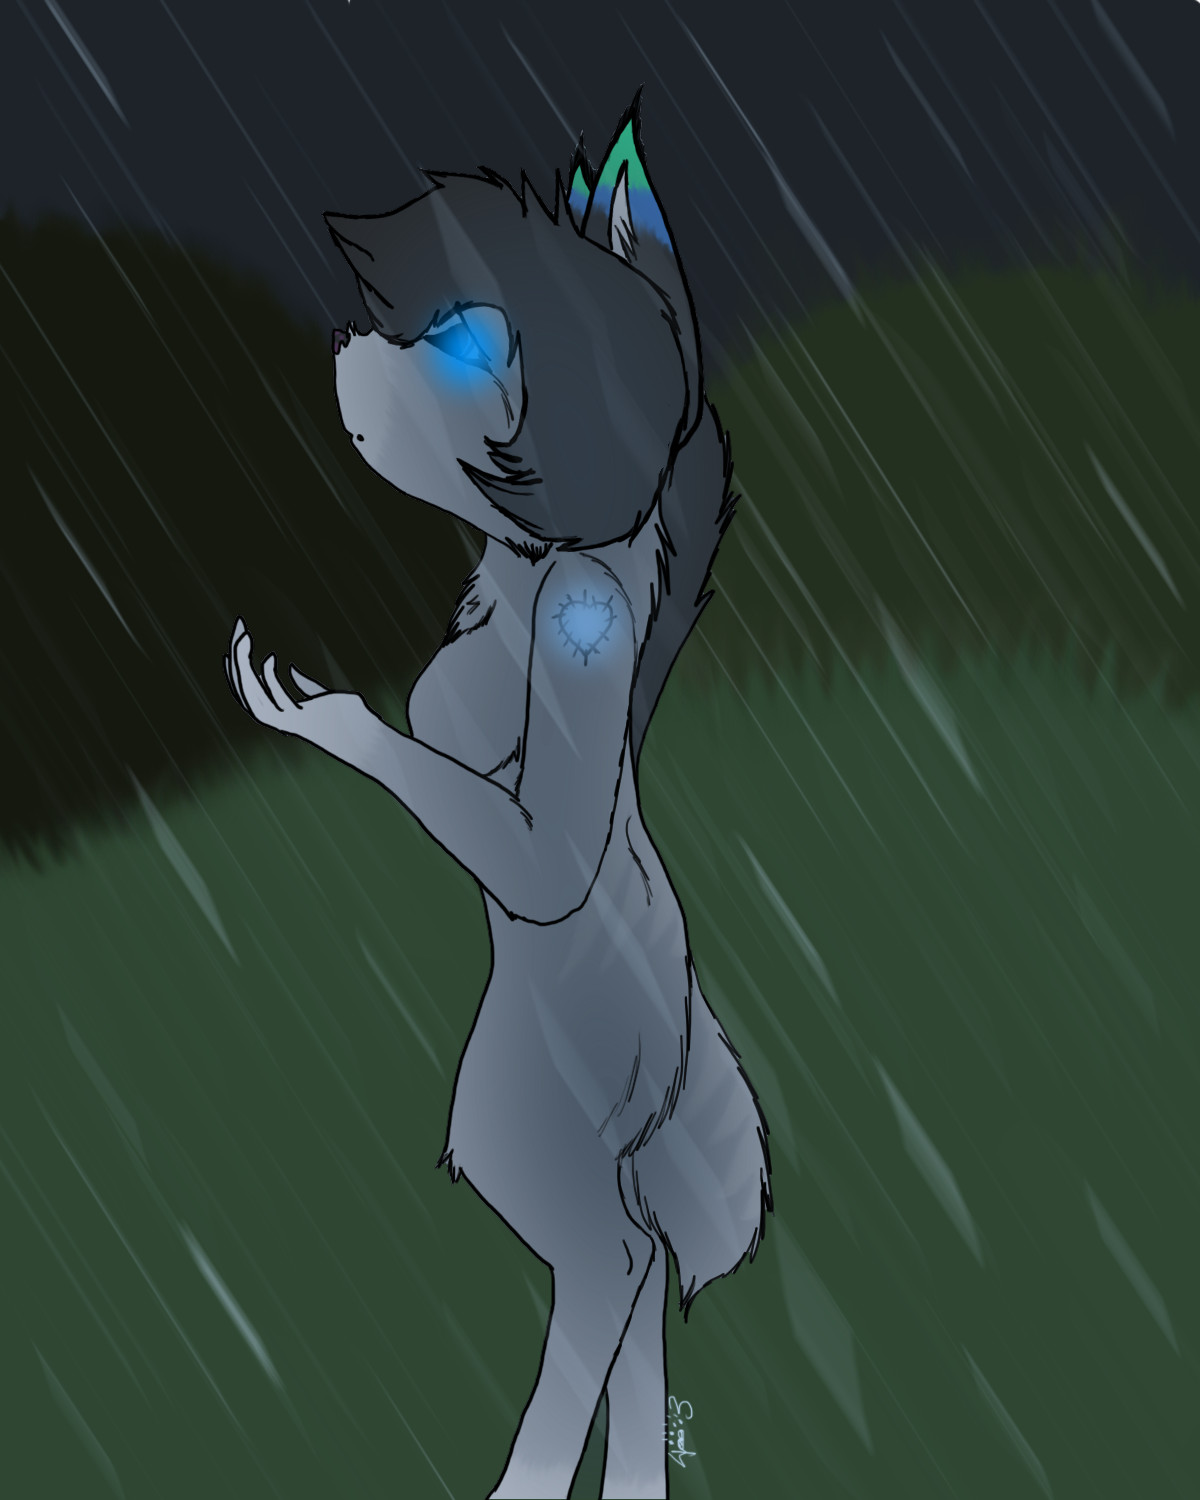 Is The Sky Crying? by LoneBlackWollf